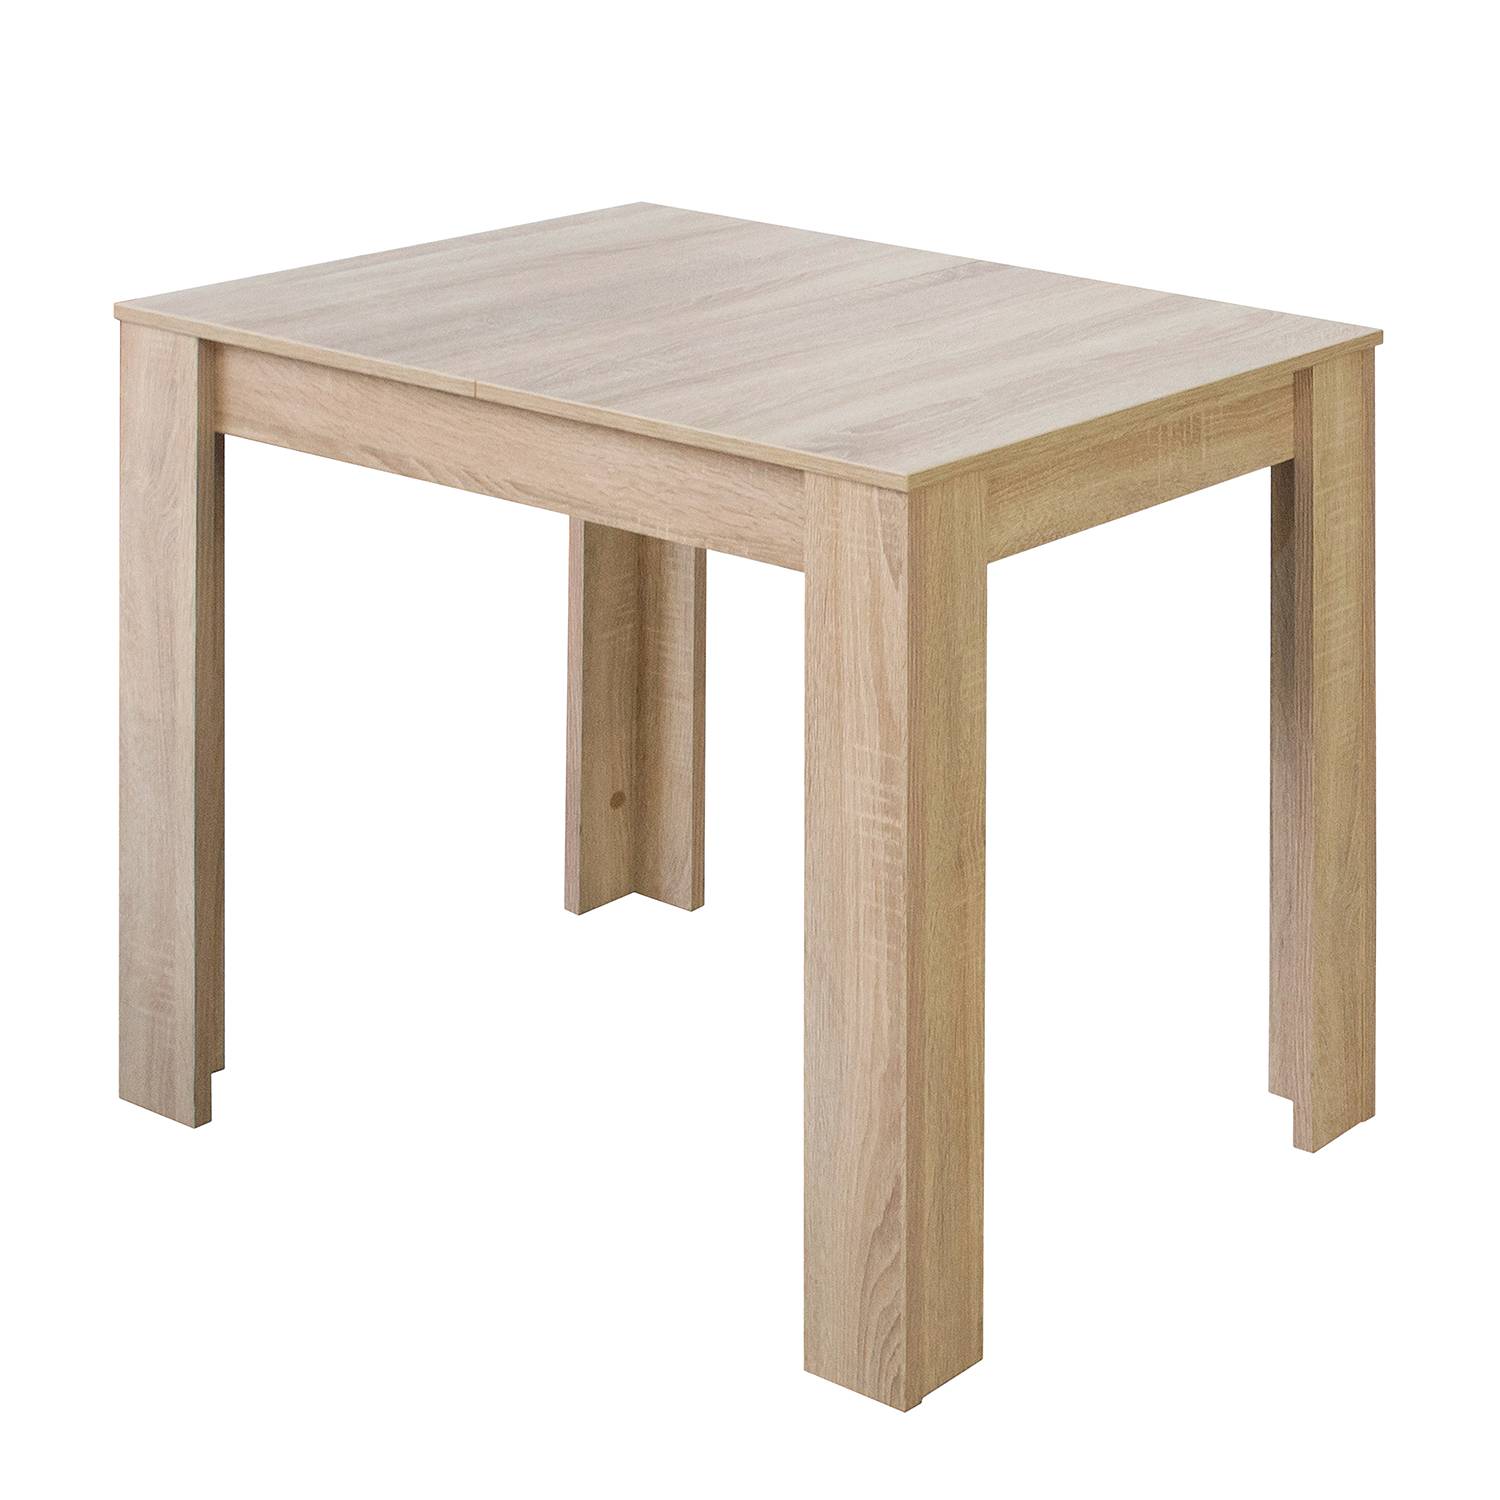 Image of Table extensible Fairford 000000001000121341